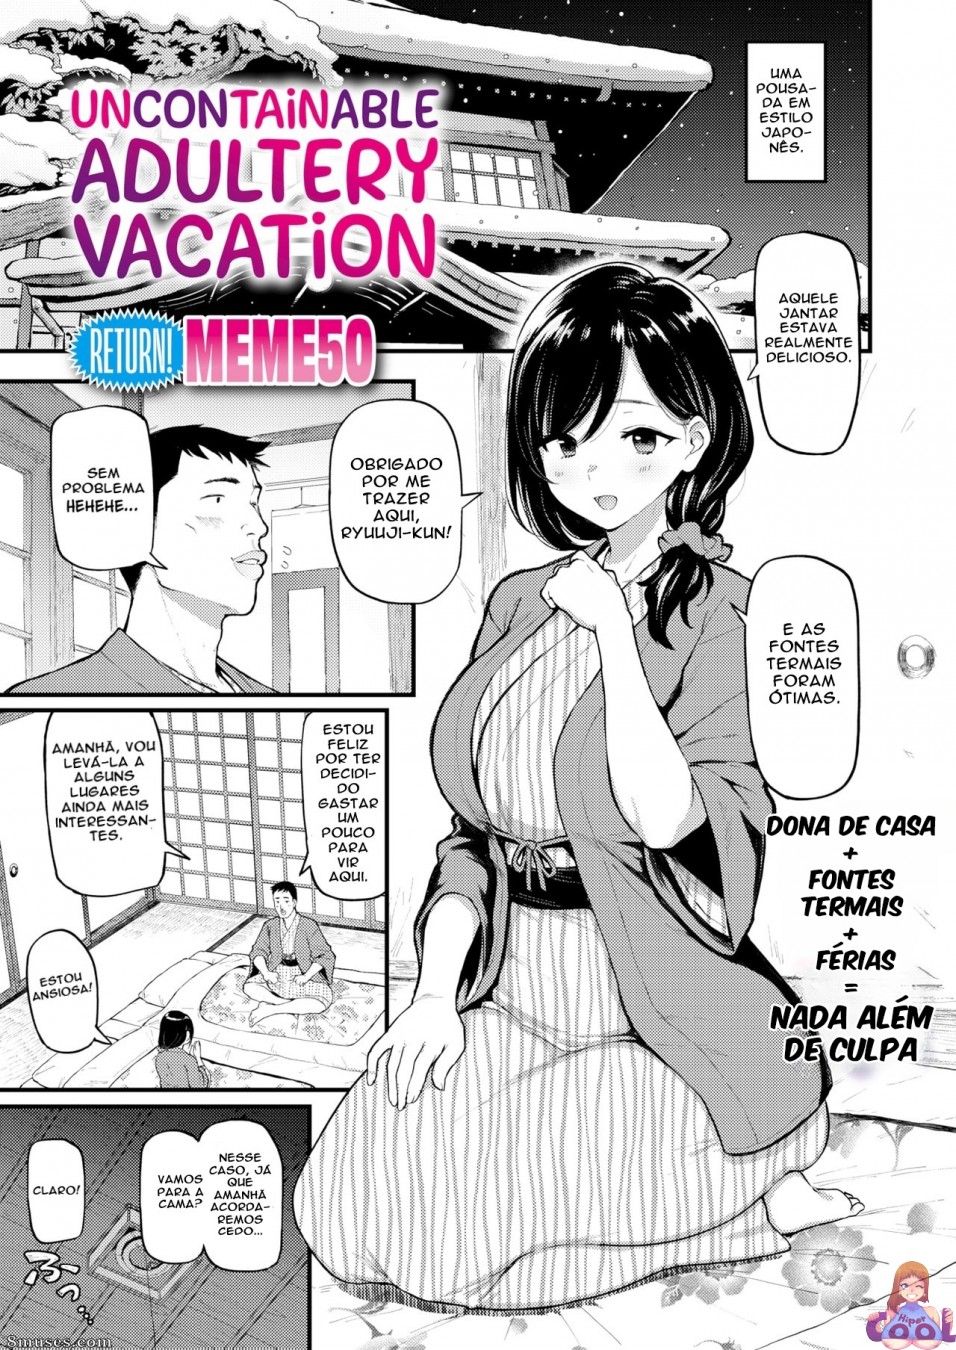 Uncontainable Adultery Vacation